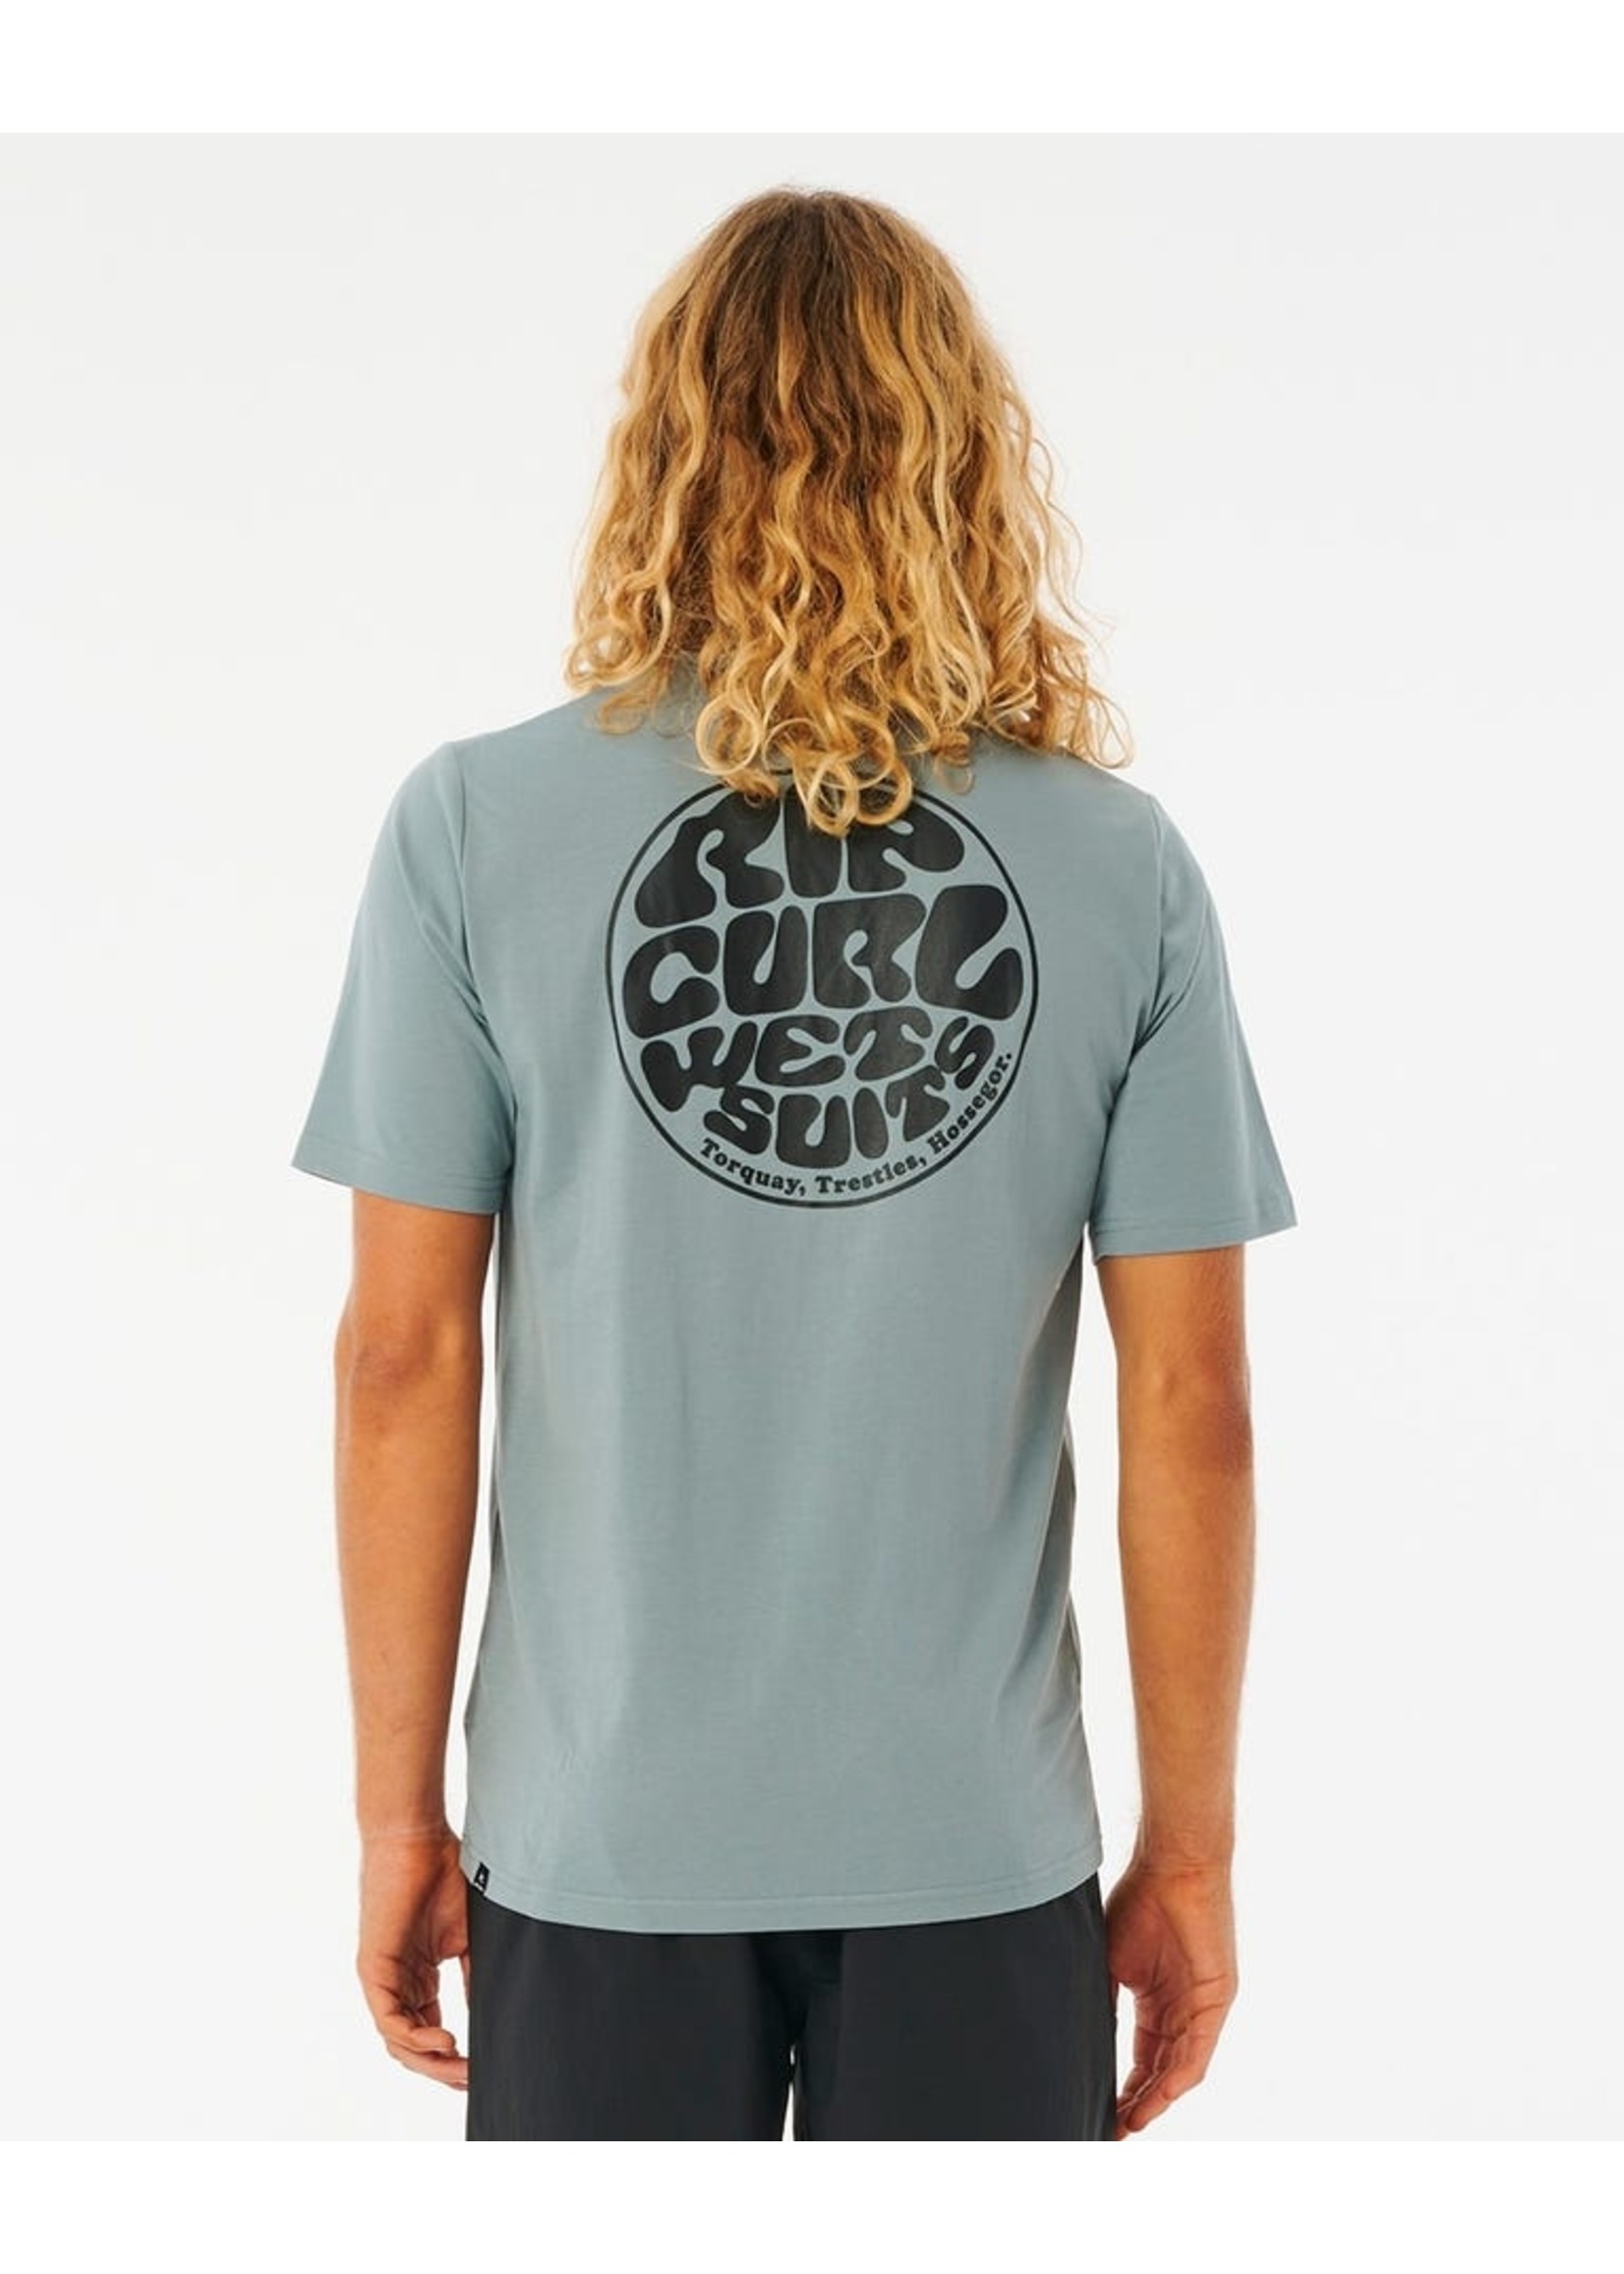 Rip Curl ICONS OF SURF UPF S/S S23